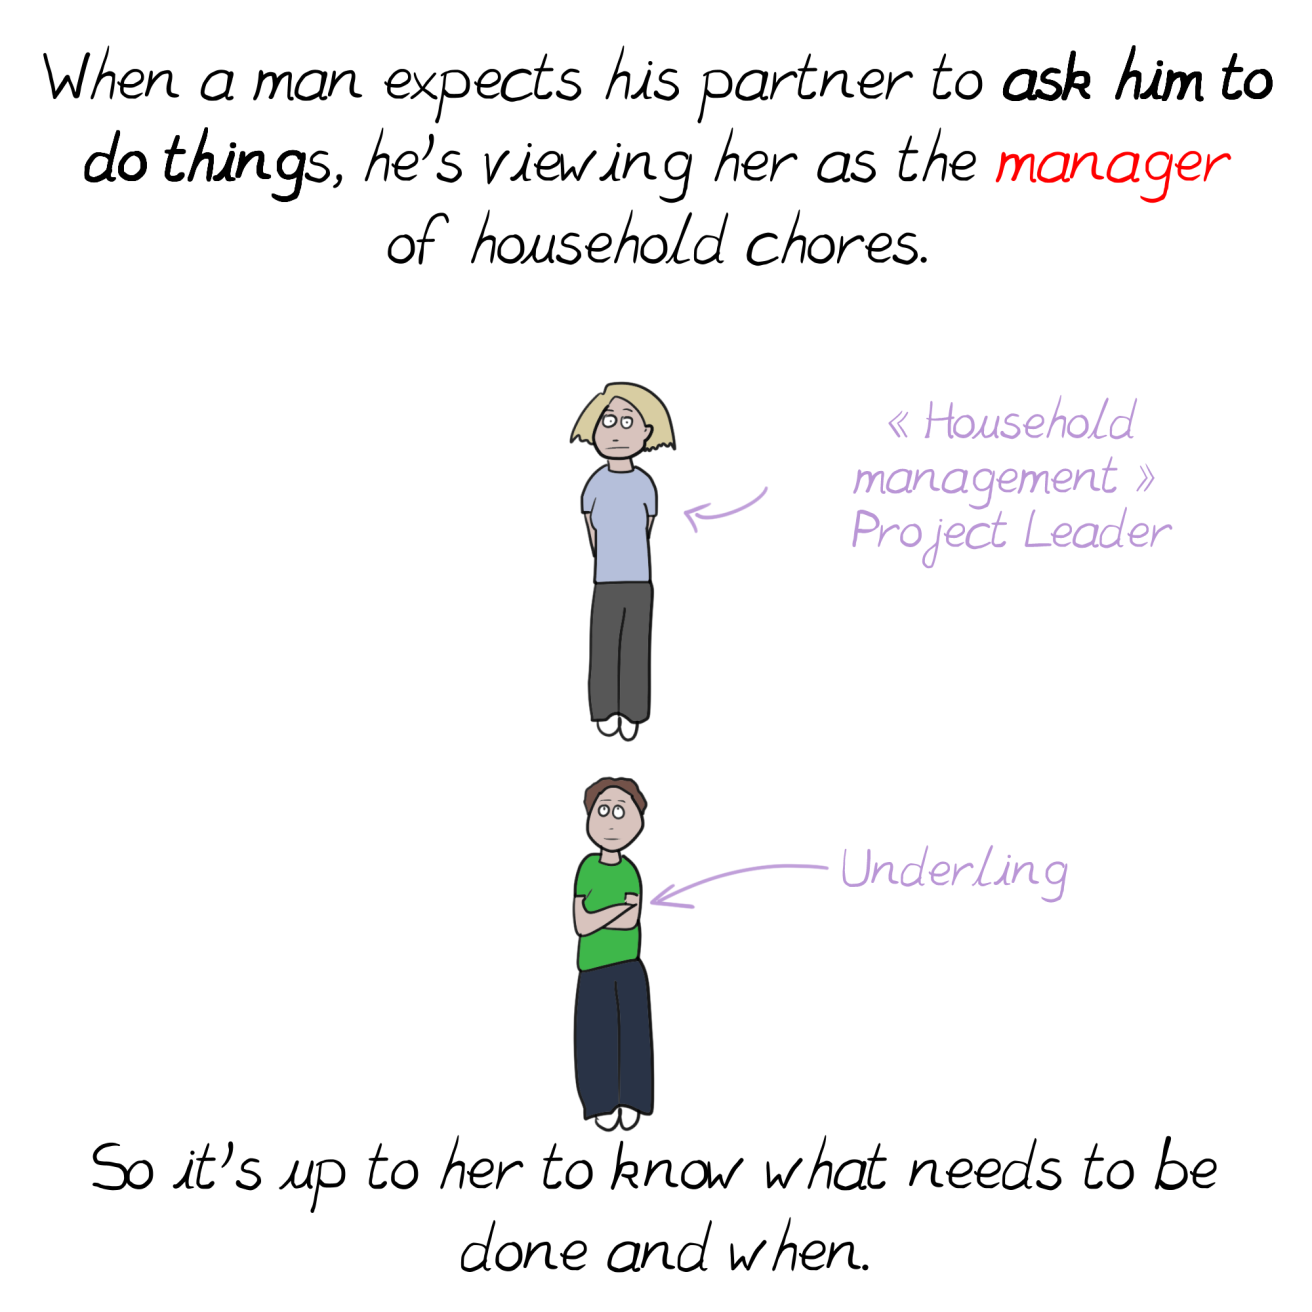 Expecting things. Underling. Gender Wars of household Chores перевод. The Gender thing. Asking for things and Replying.